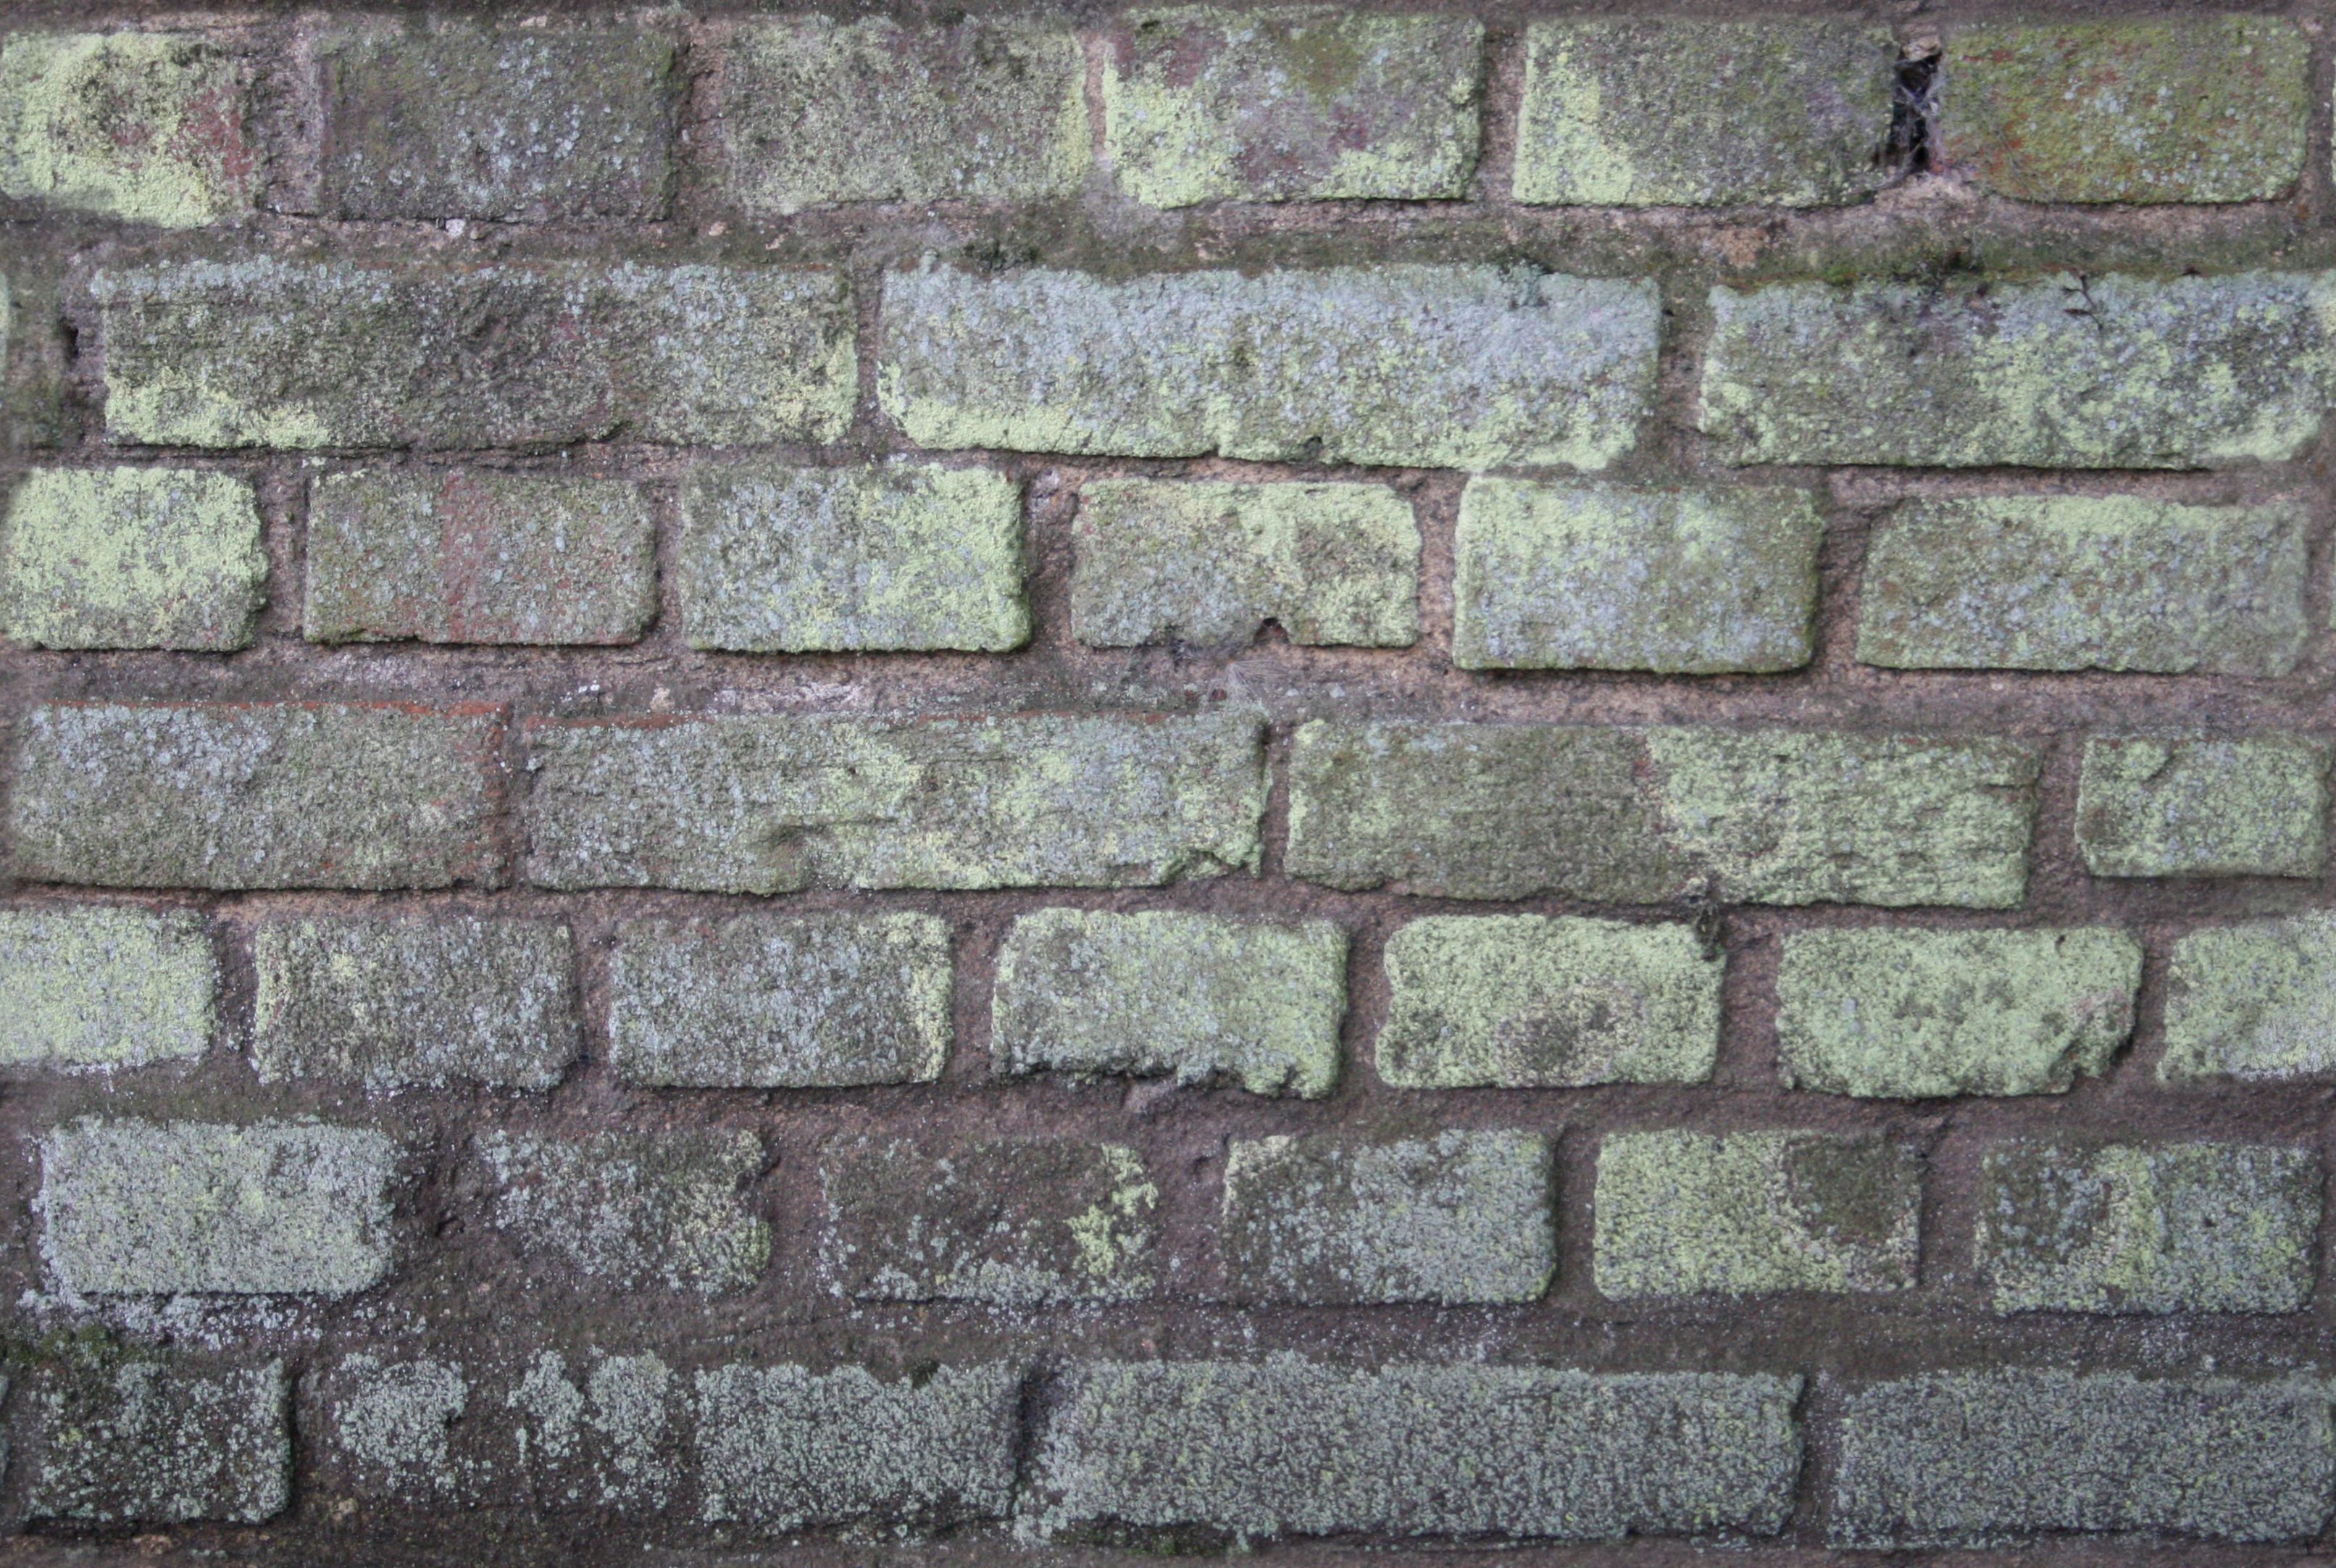 Mold/Fungus covered Brick Wall - Seamless Texture with Normalmap ...